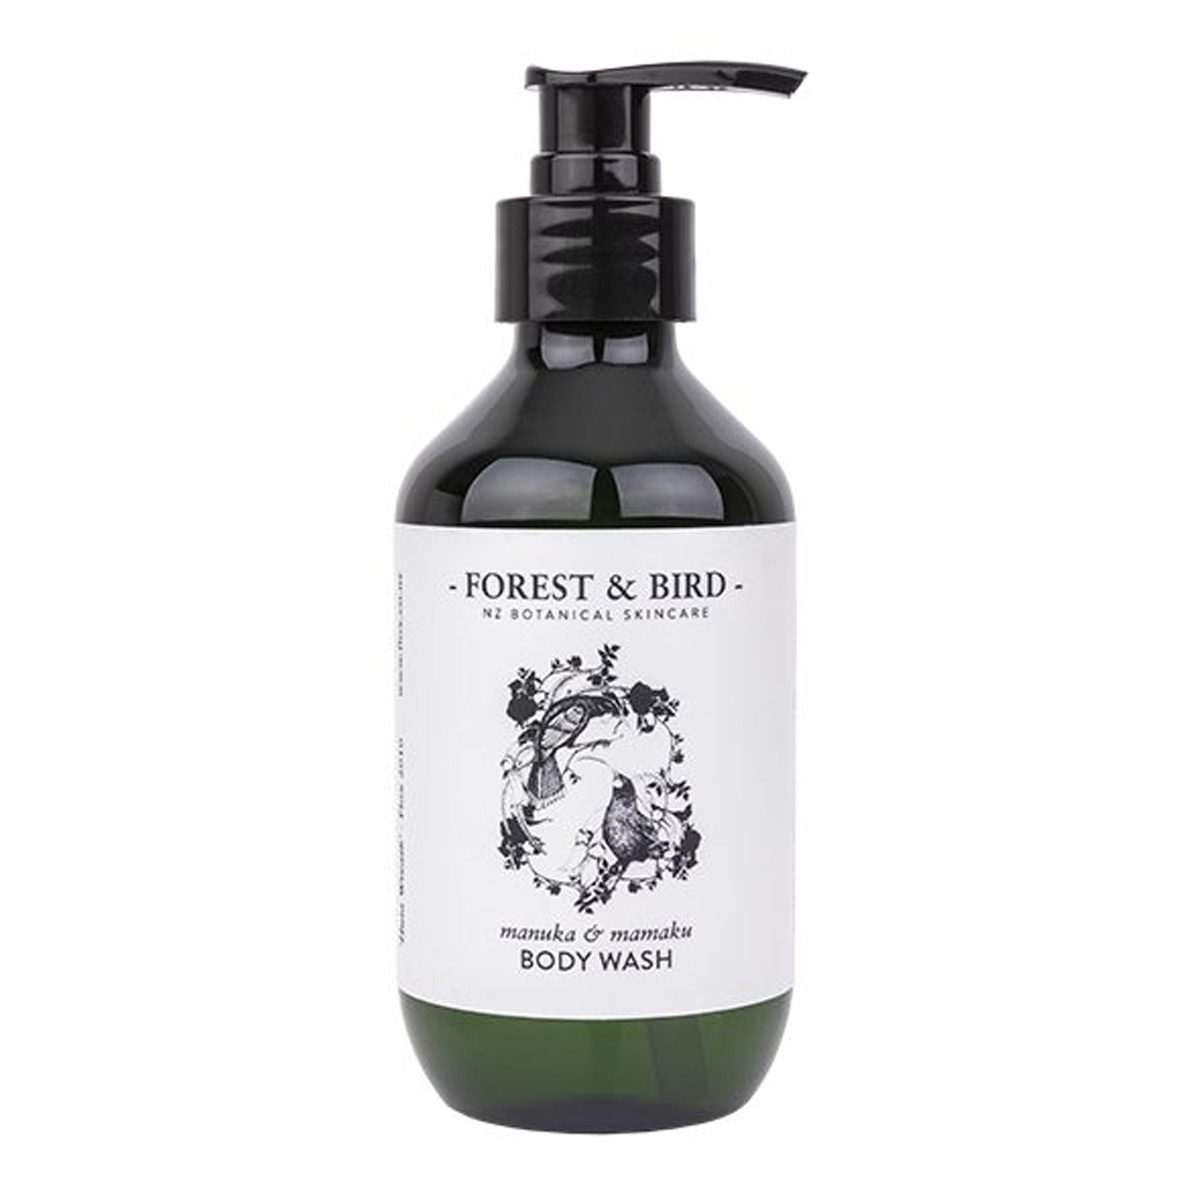 consumables-hospitality-guest-amenities-forest-and-bird-body-wash-16x300ml-enriched-native-forest-extracts-kawakawa-kowhai-vjs-distributors-HUIABBR